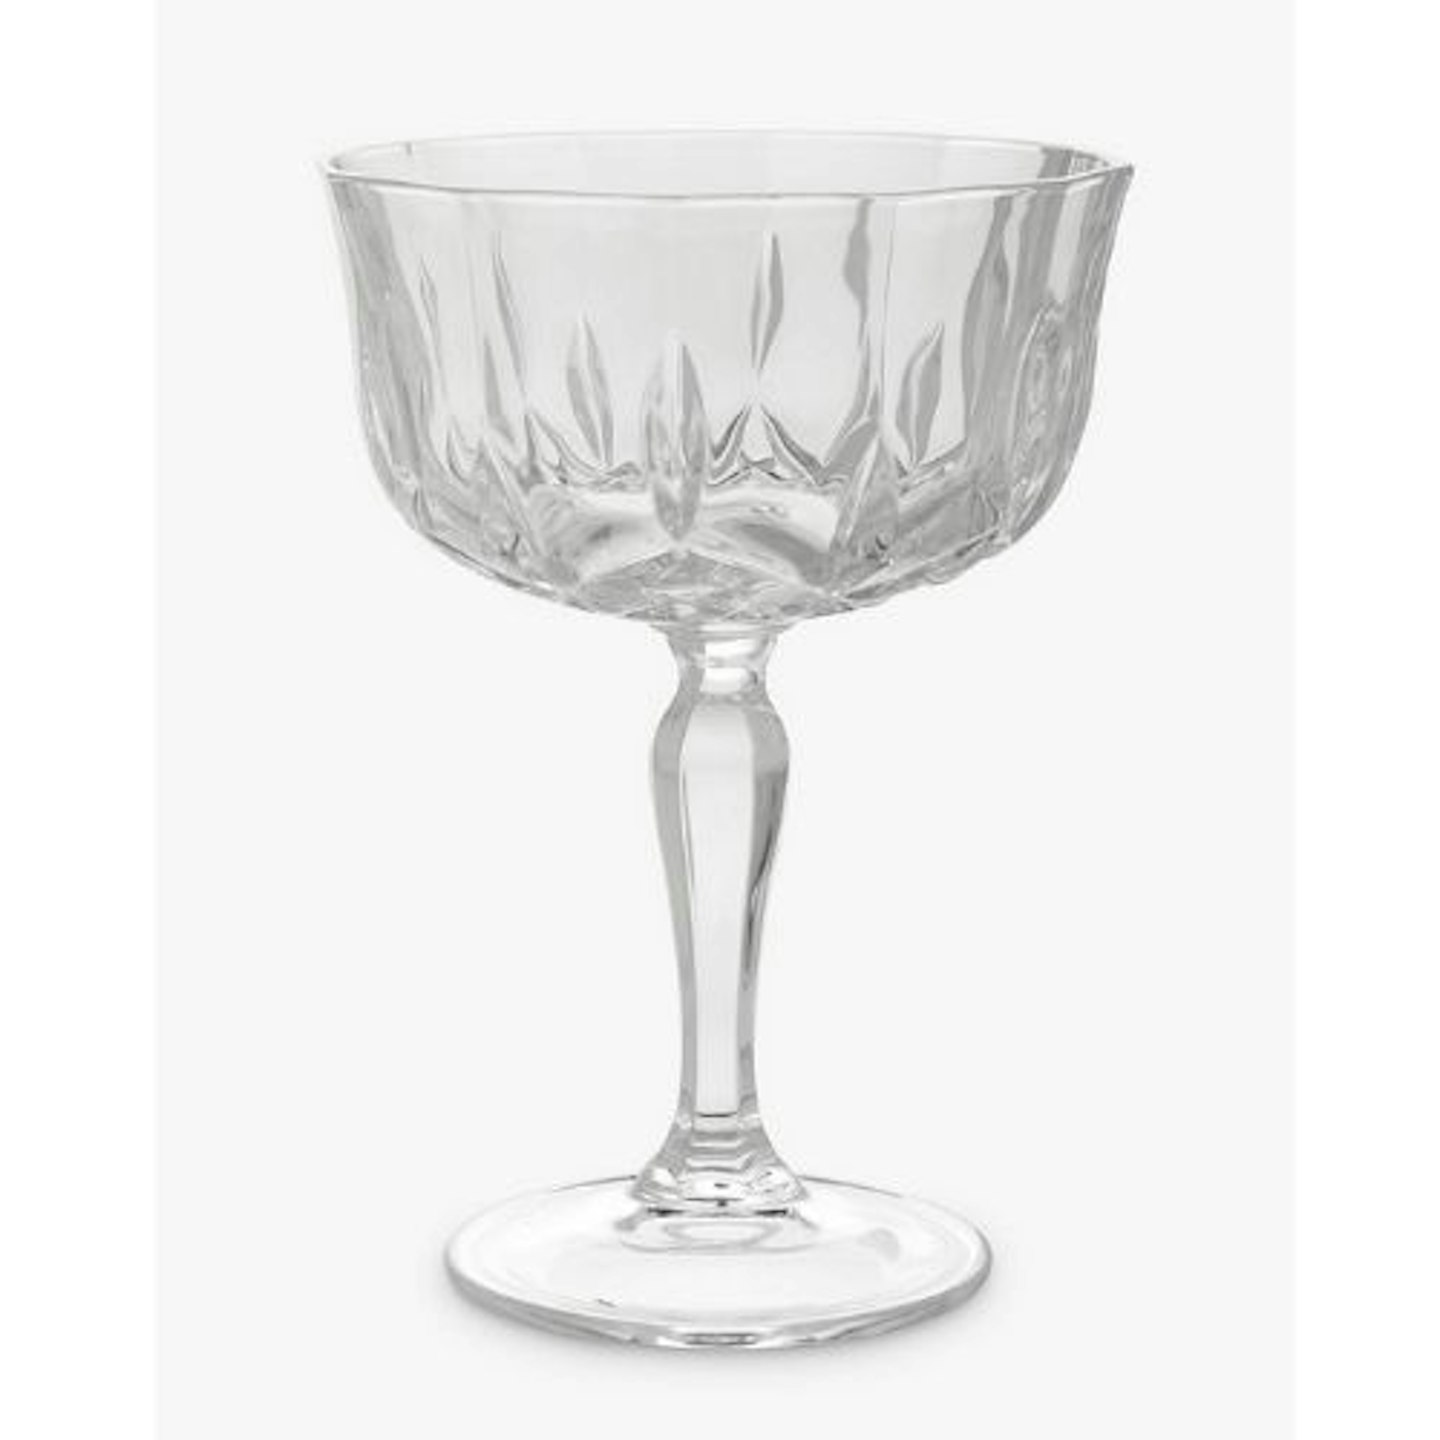 John Lewis & Partners Paloma Opera Cut Crystal Glass Cocktail Coupe